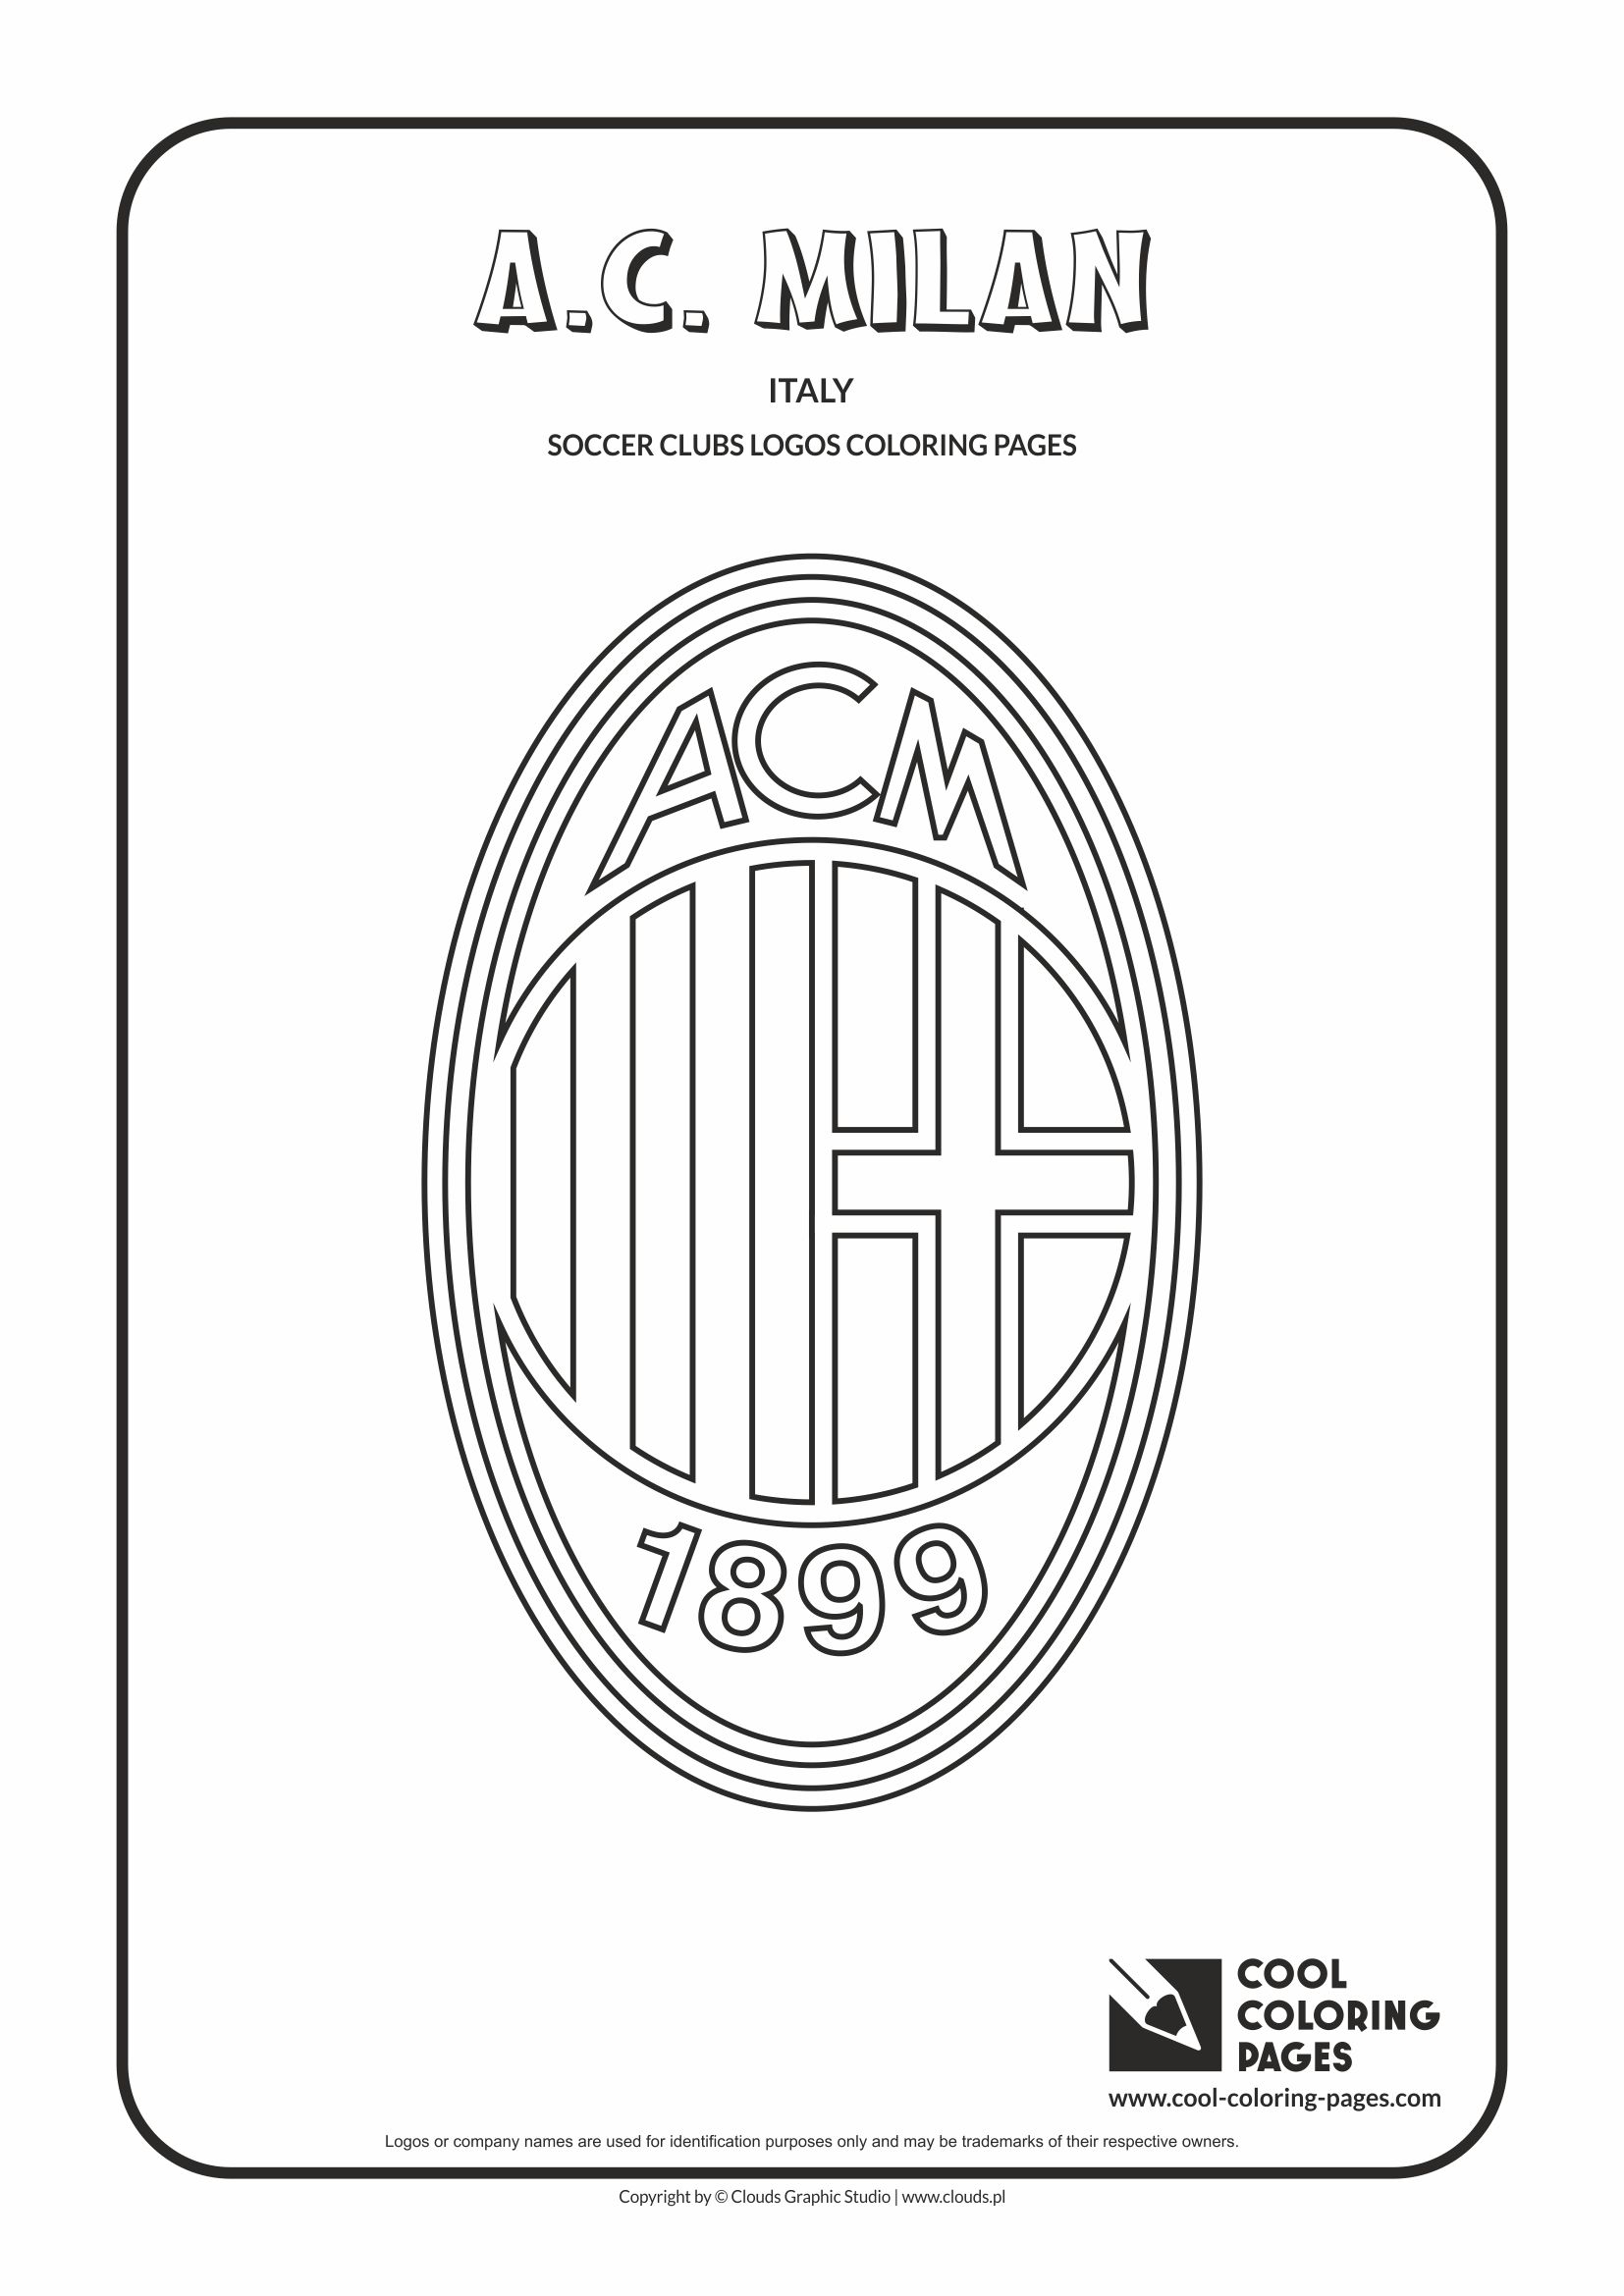 Cool coloring pages ac milan logo coloring page